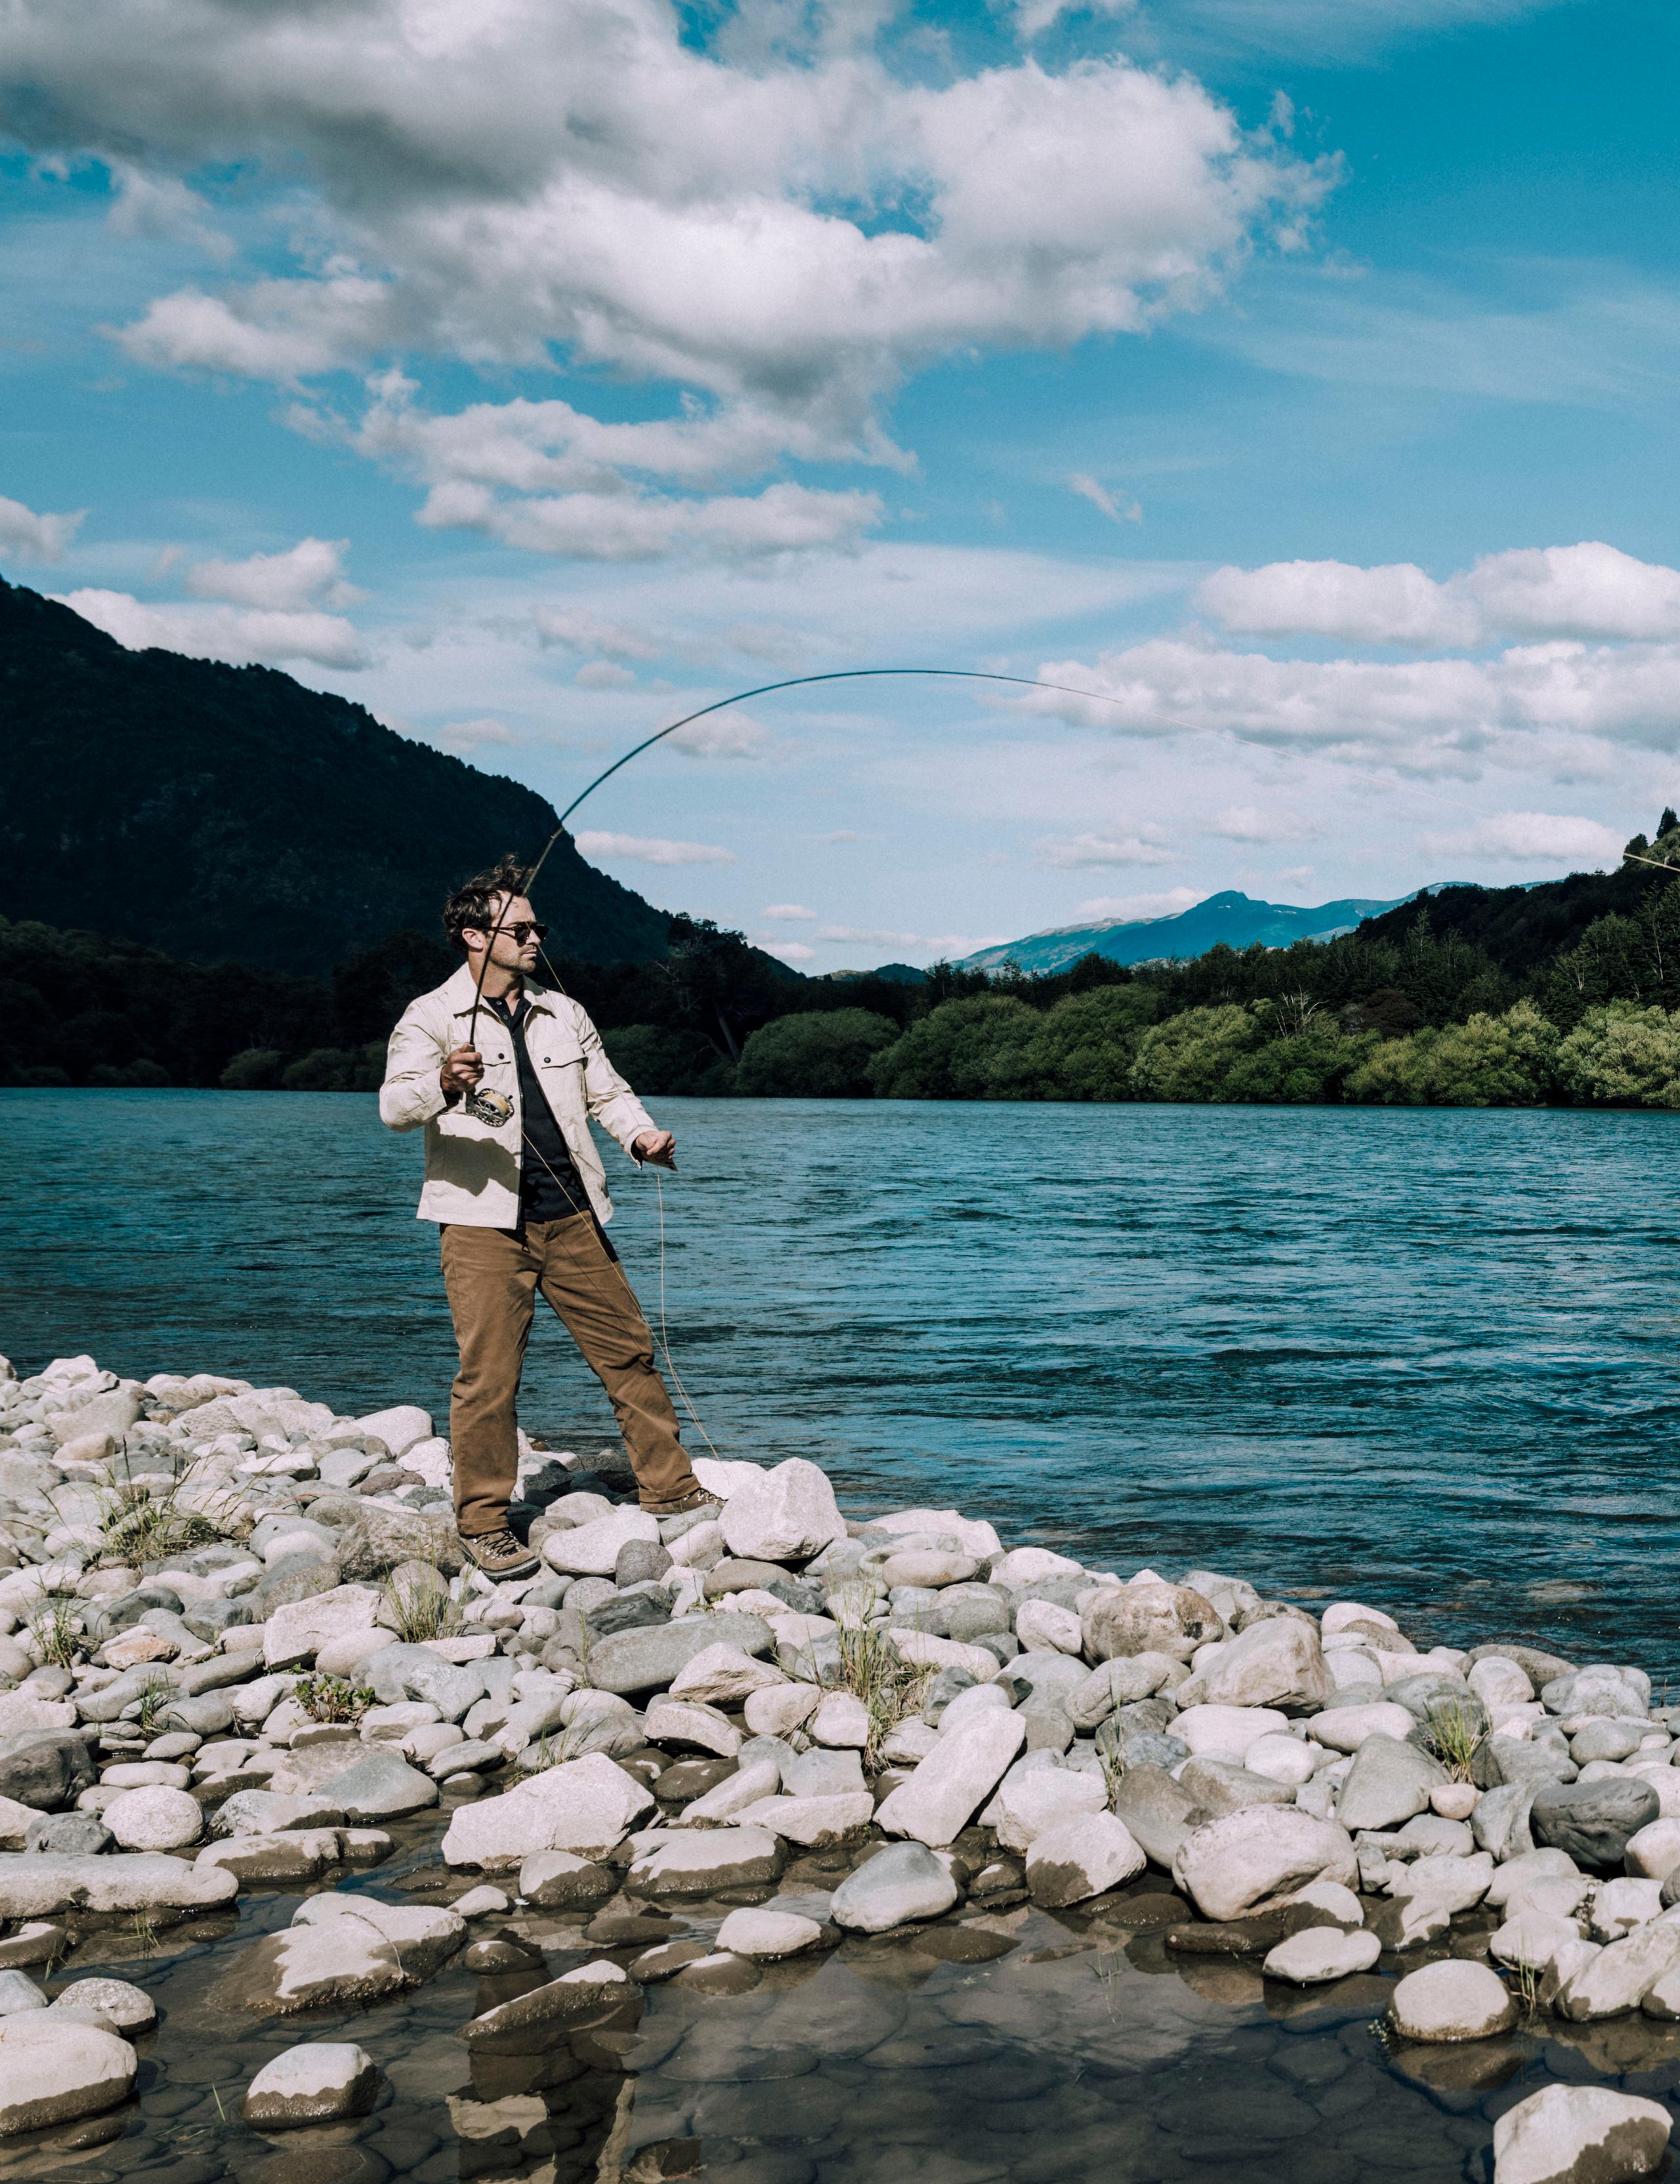 Man on rivers edge fishing in the Patagonia region of Chile